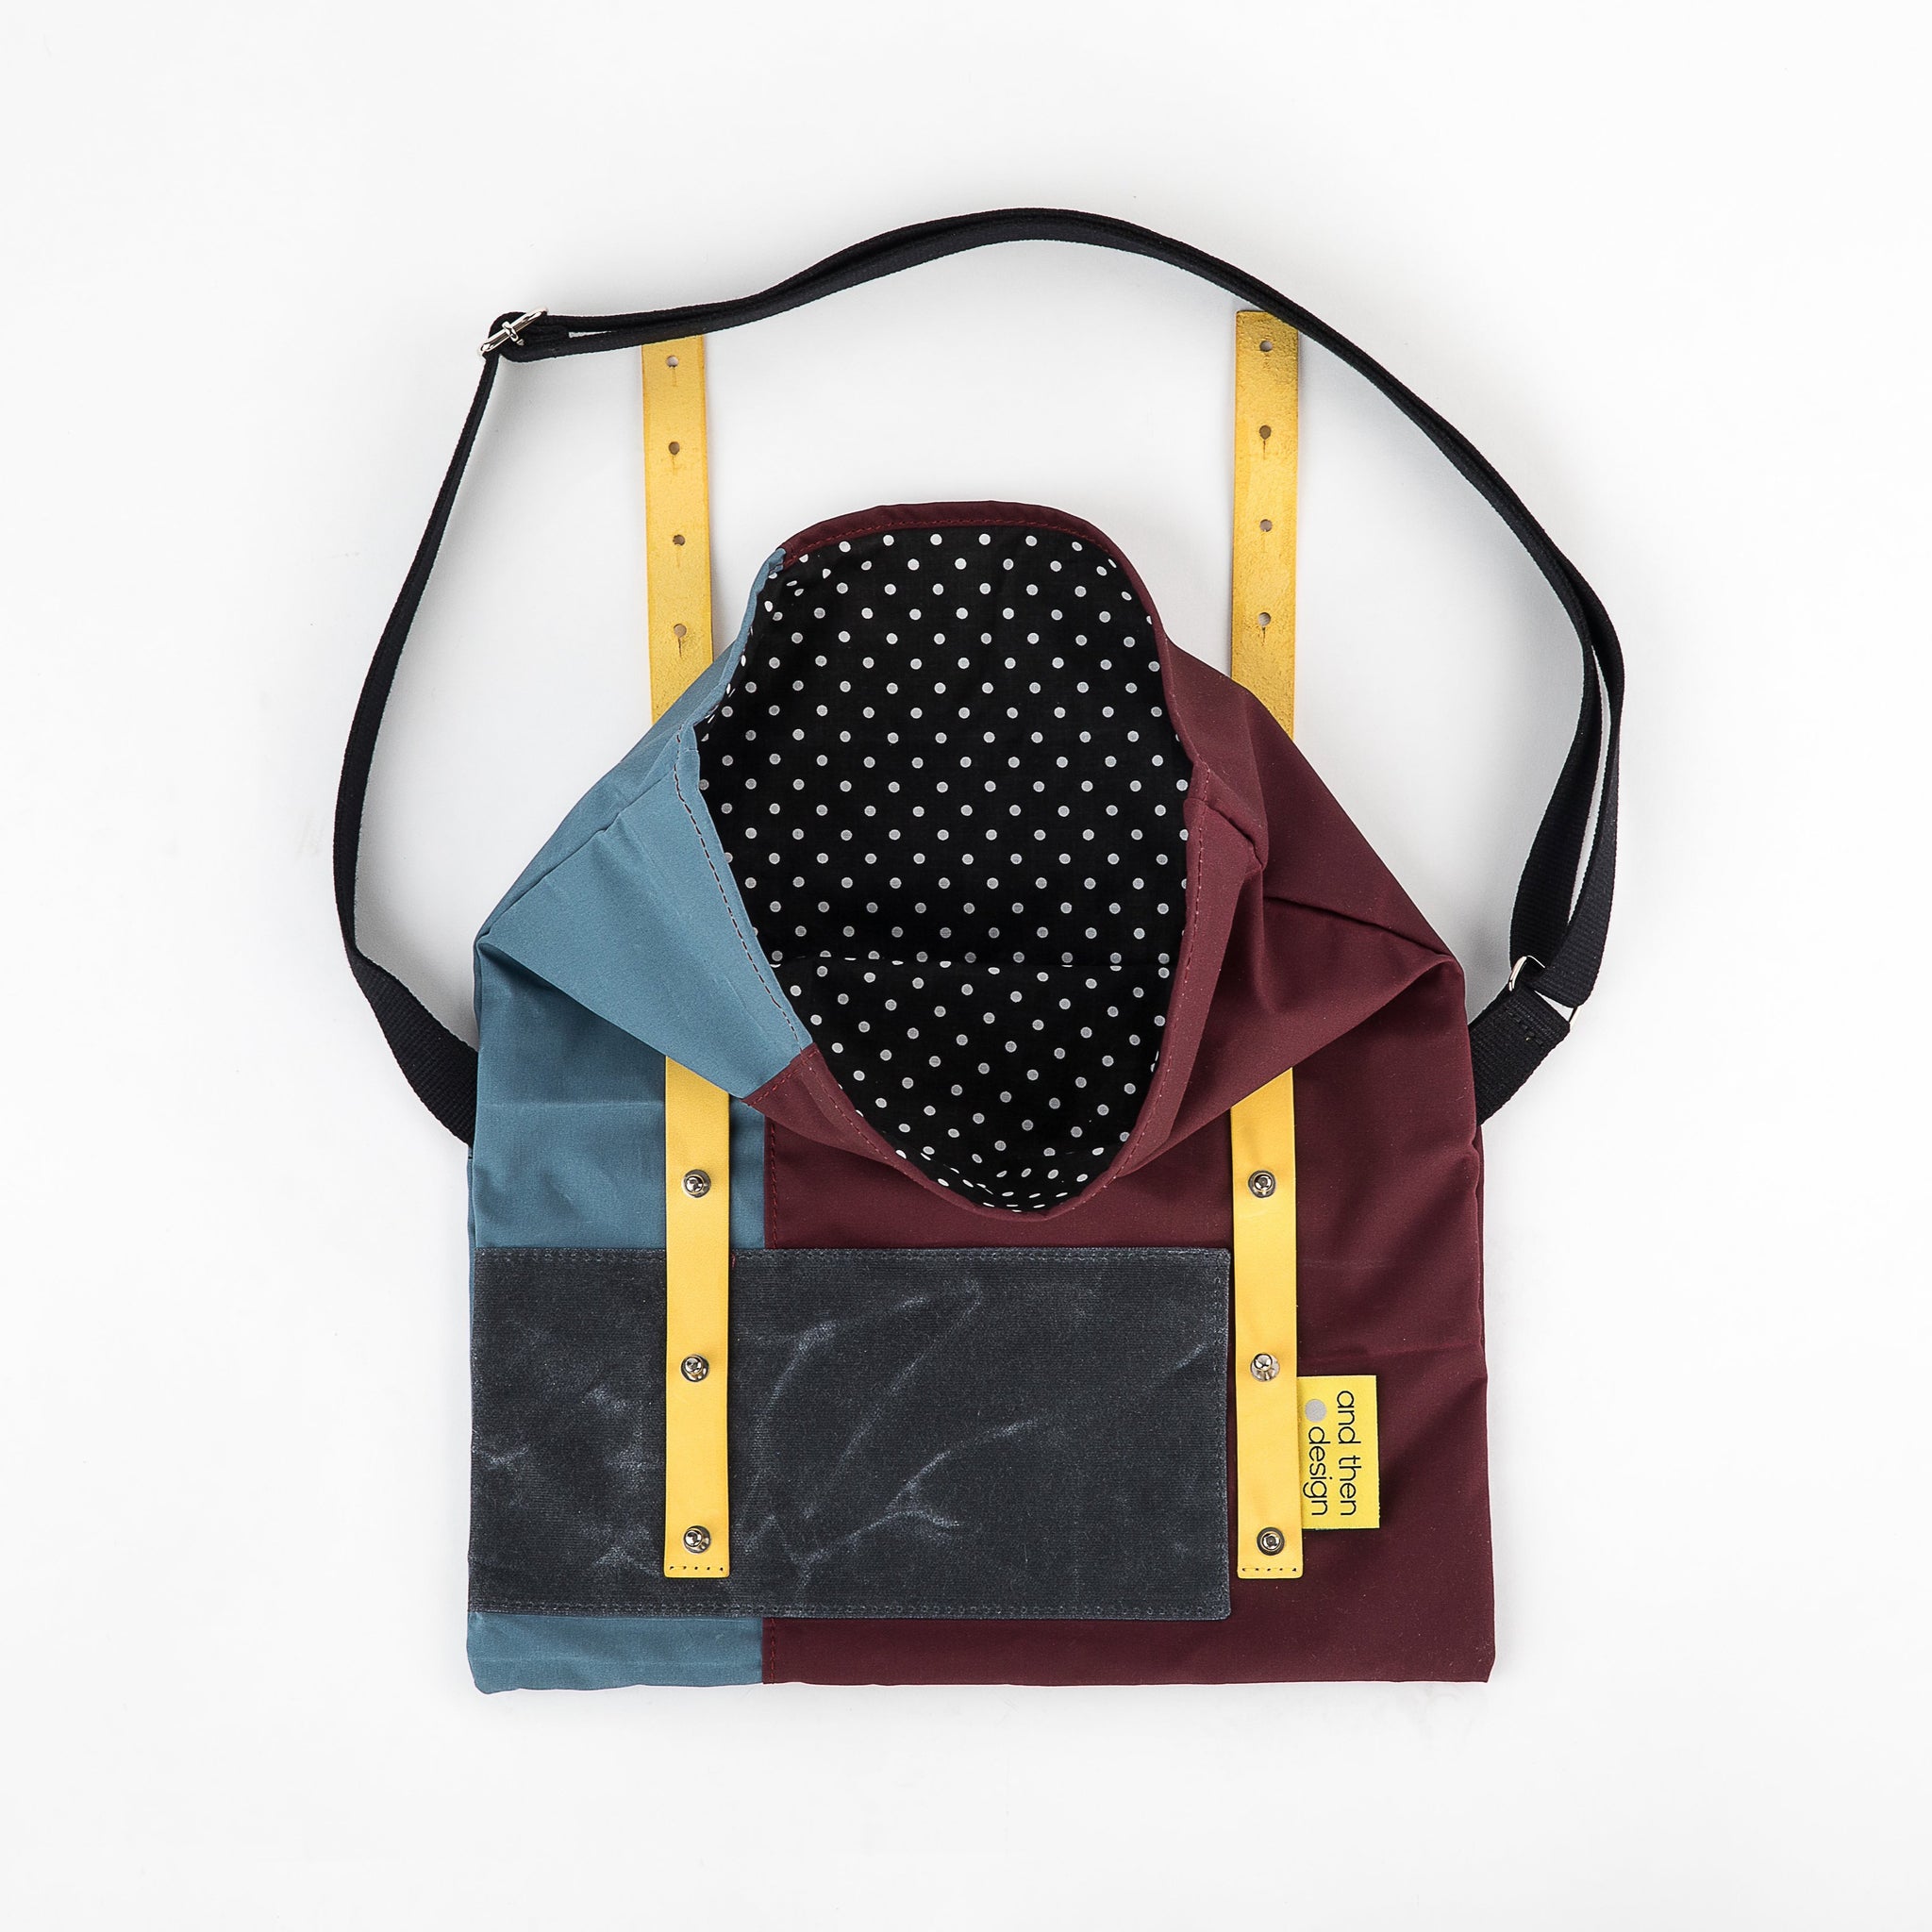 andthen.design an evolution of Vel-Oh.com-Nip Out Bag | Musette zero-1 zero waste shoulder bag, musette, great for cycling or just a small shoulder bag with polka dot lining